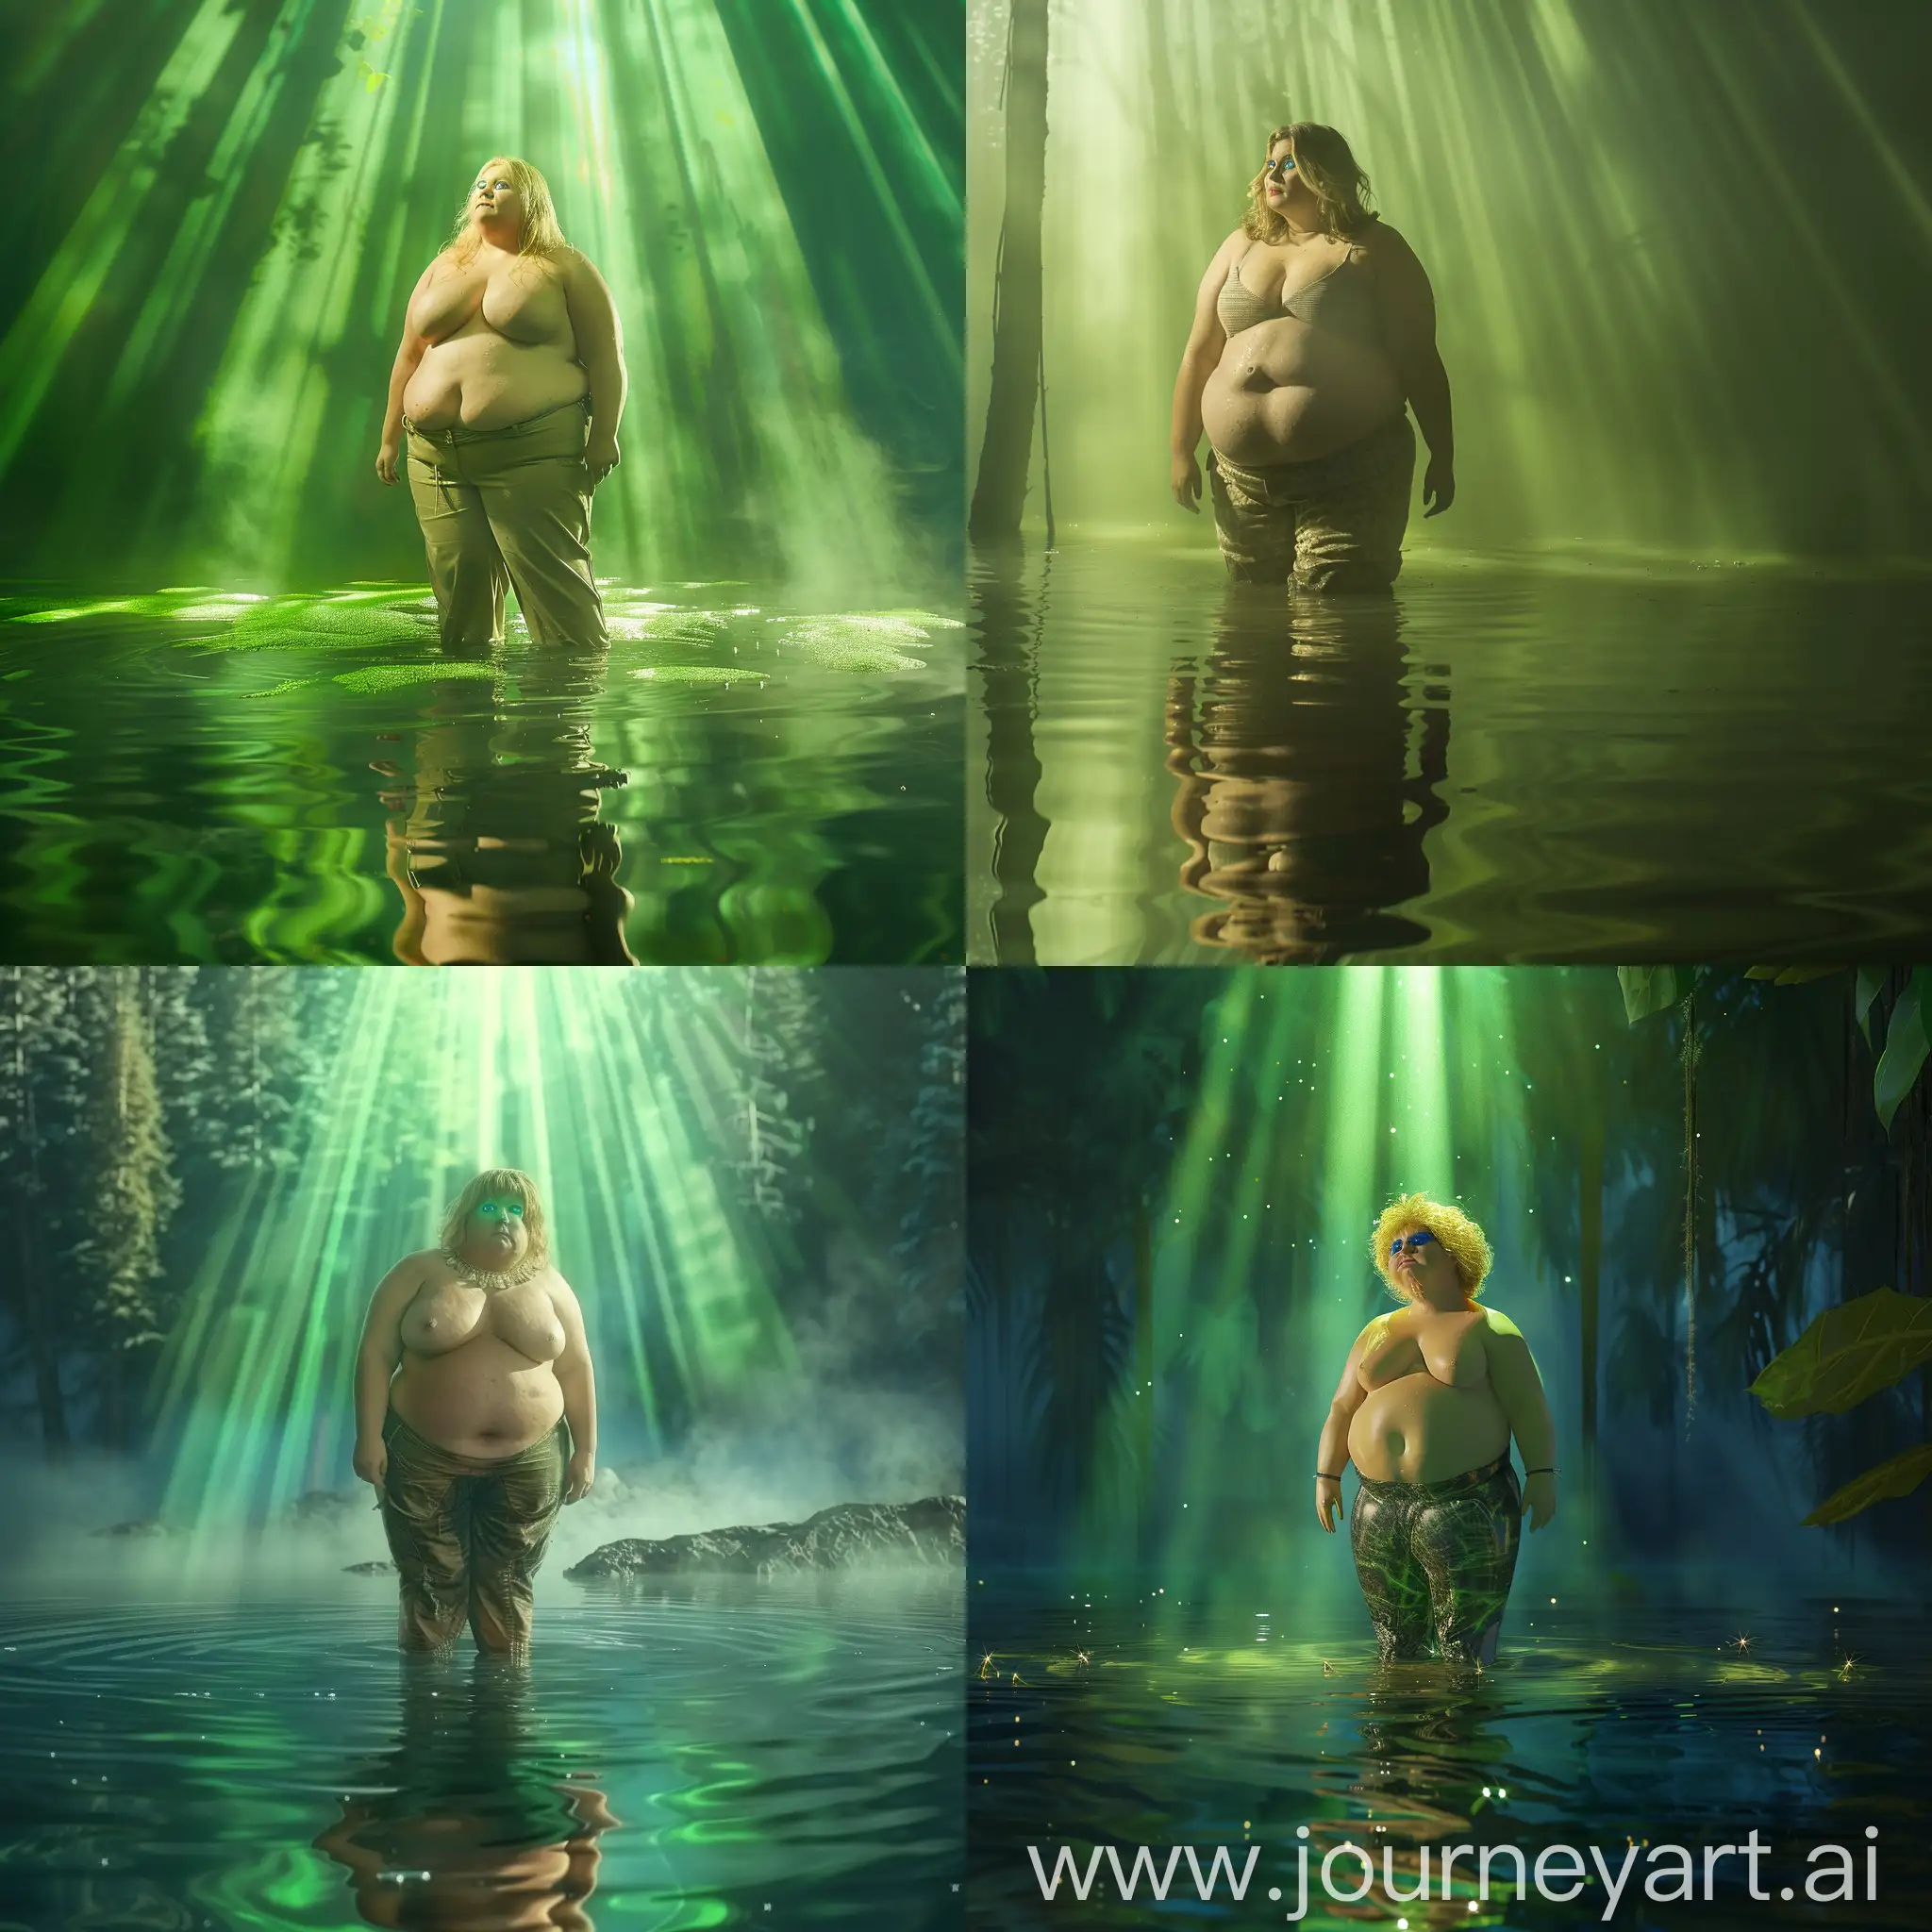 Chubby-Woman-Standing-in-Lake-with-Blue-Eyes-and-Blonde-Hair